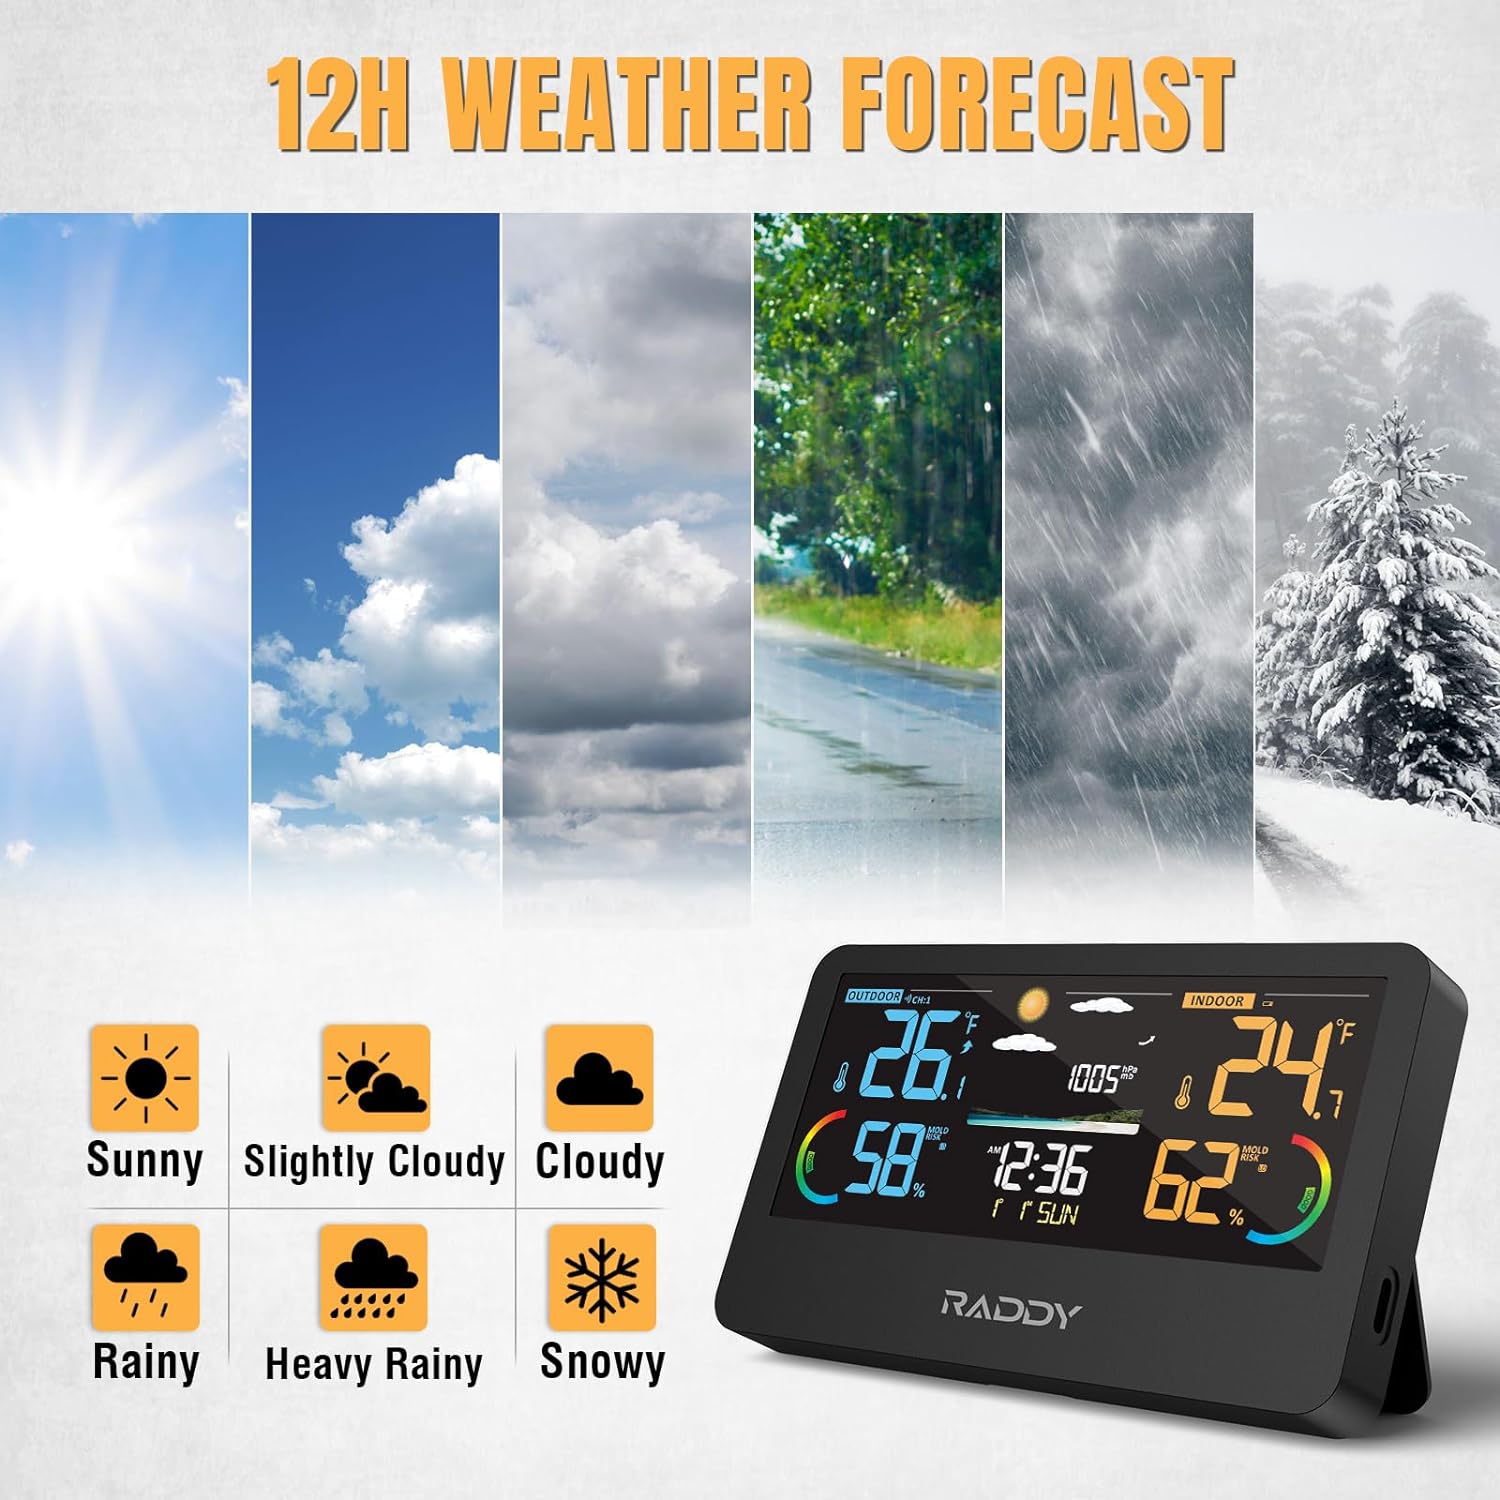 Raddy WF-55C PRO Wireless Weather Station, with Thermometer Hygrometer Barometer, Alarm Clock, Color Display, Remote Sensor